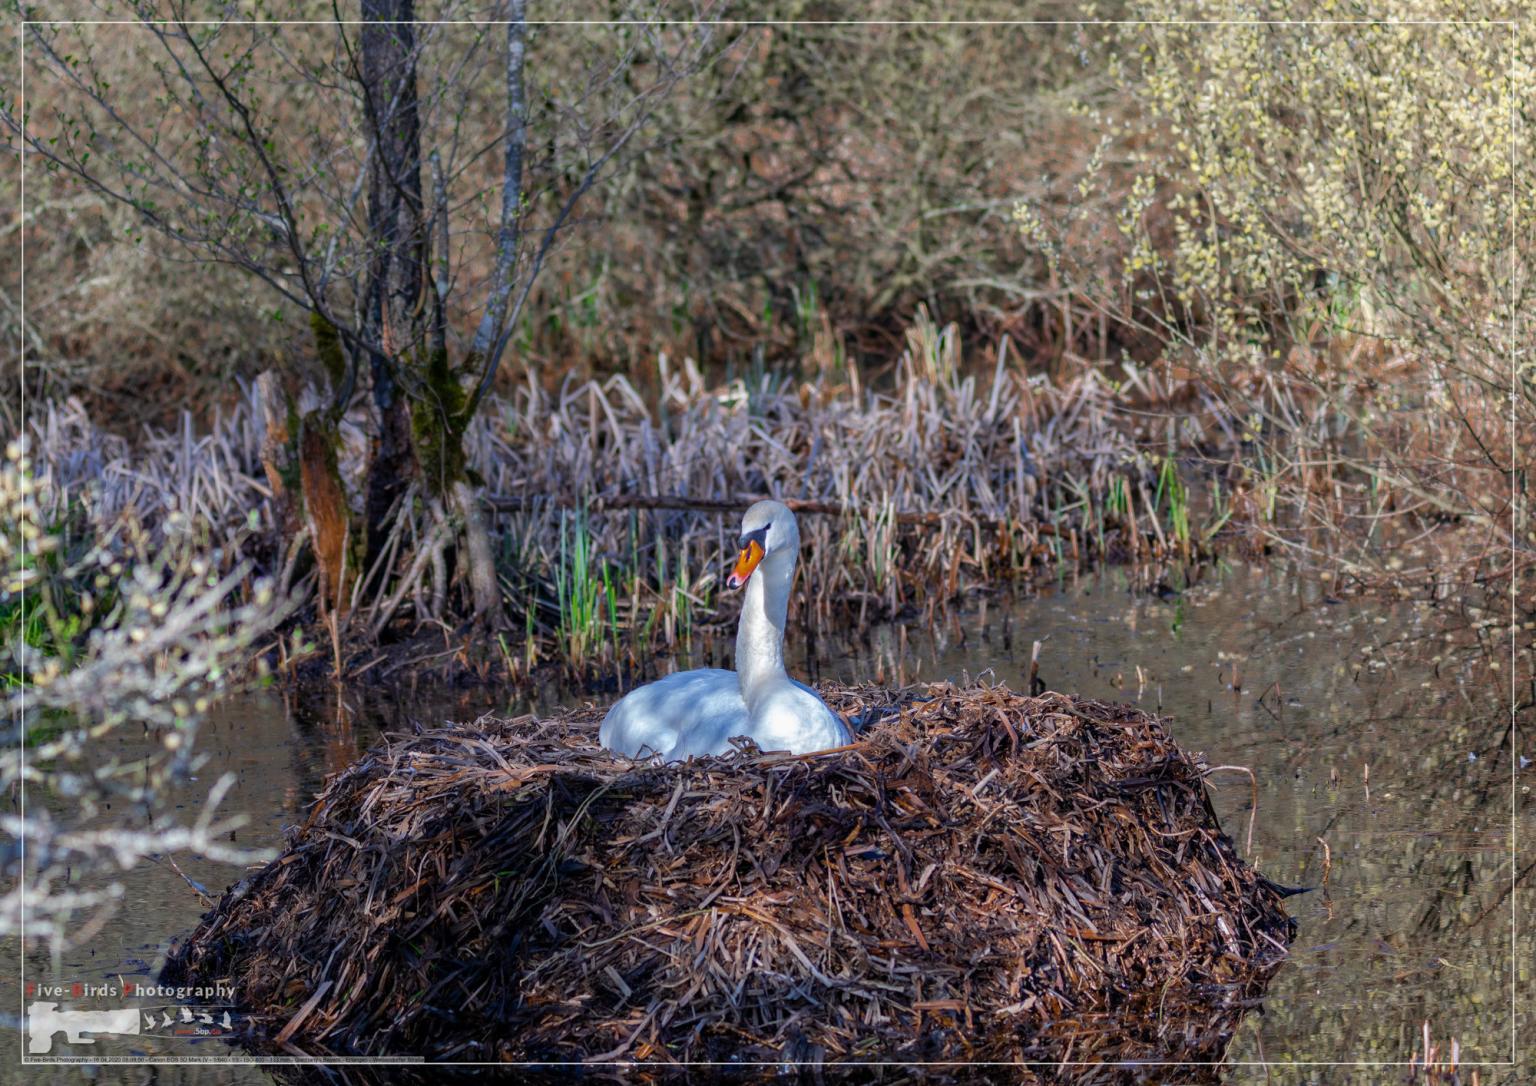 A female mute swan is brooding in its nest in southern Germany